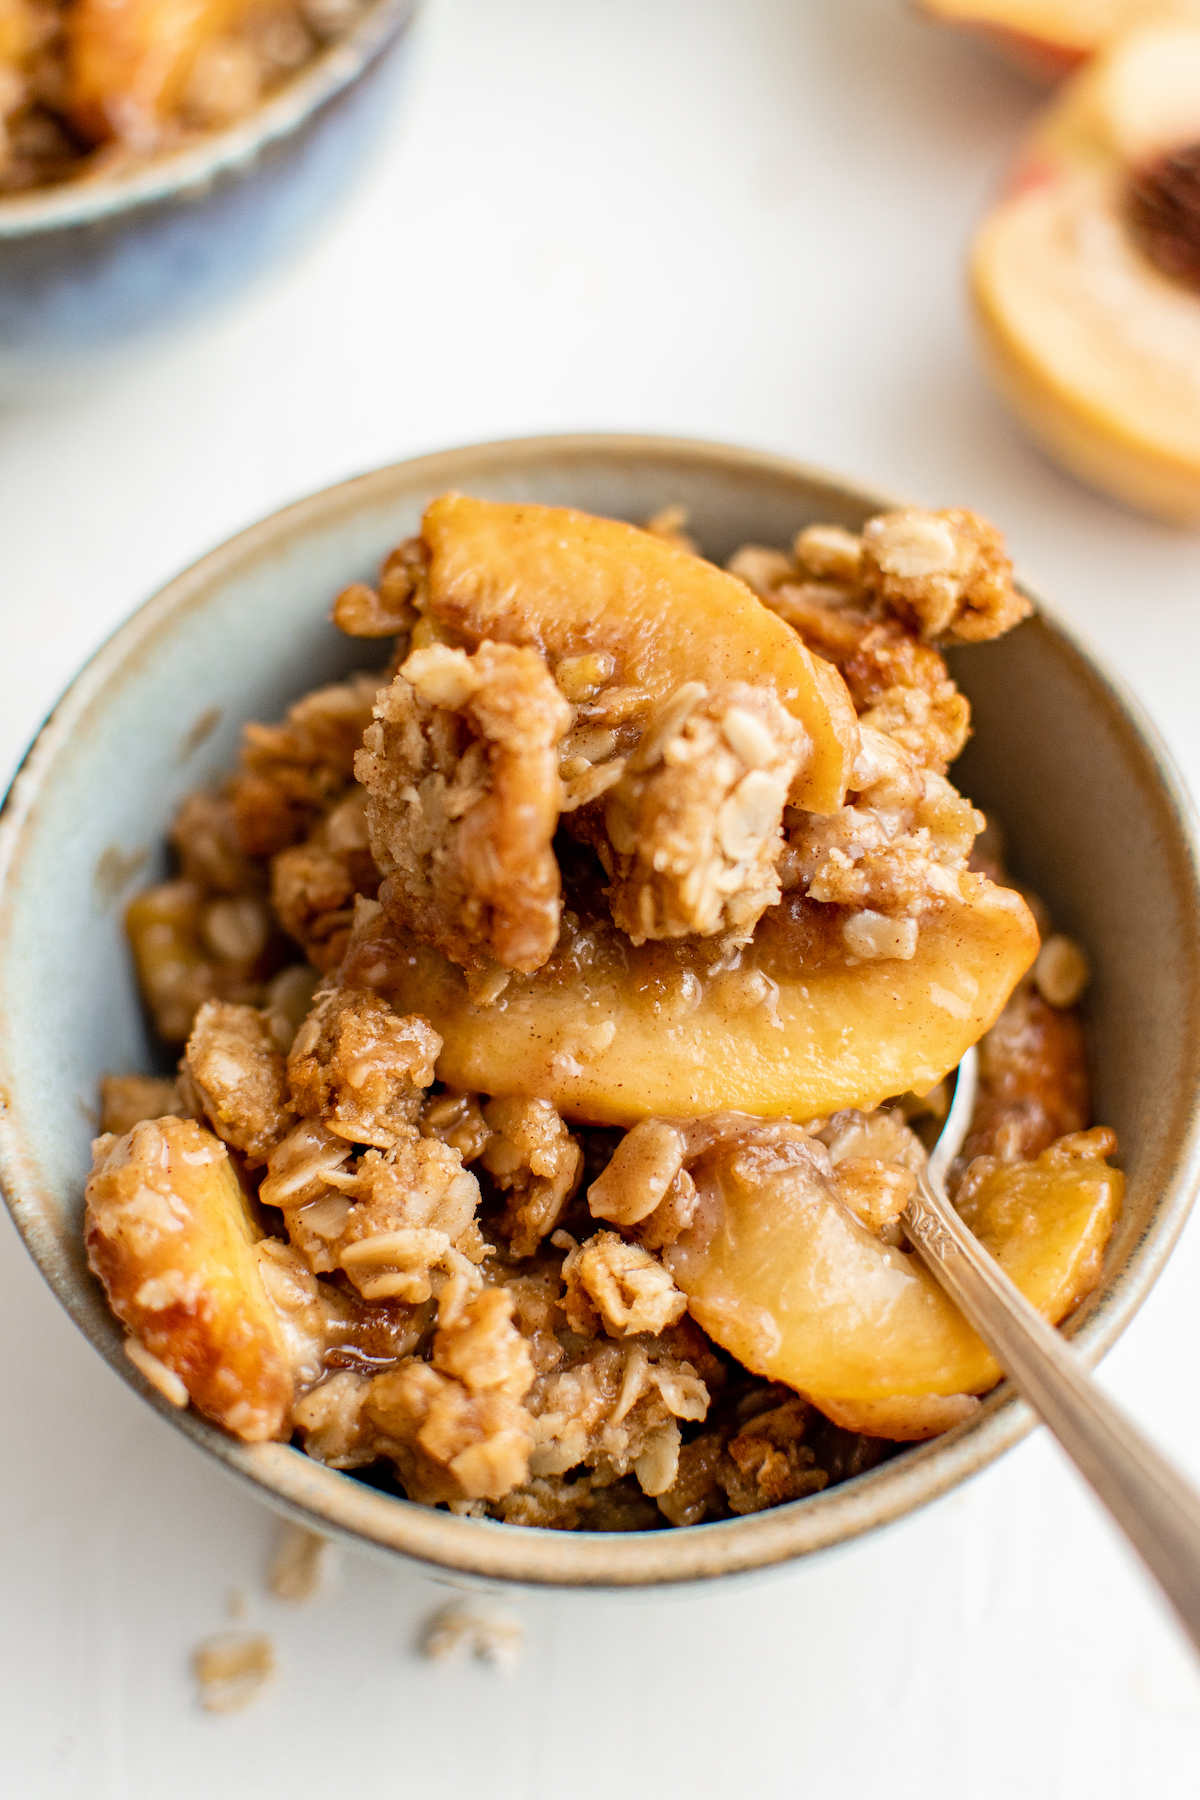 Close-up shot of peach crisp, with a spoon in the bowl.